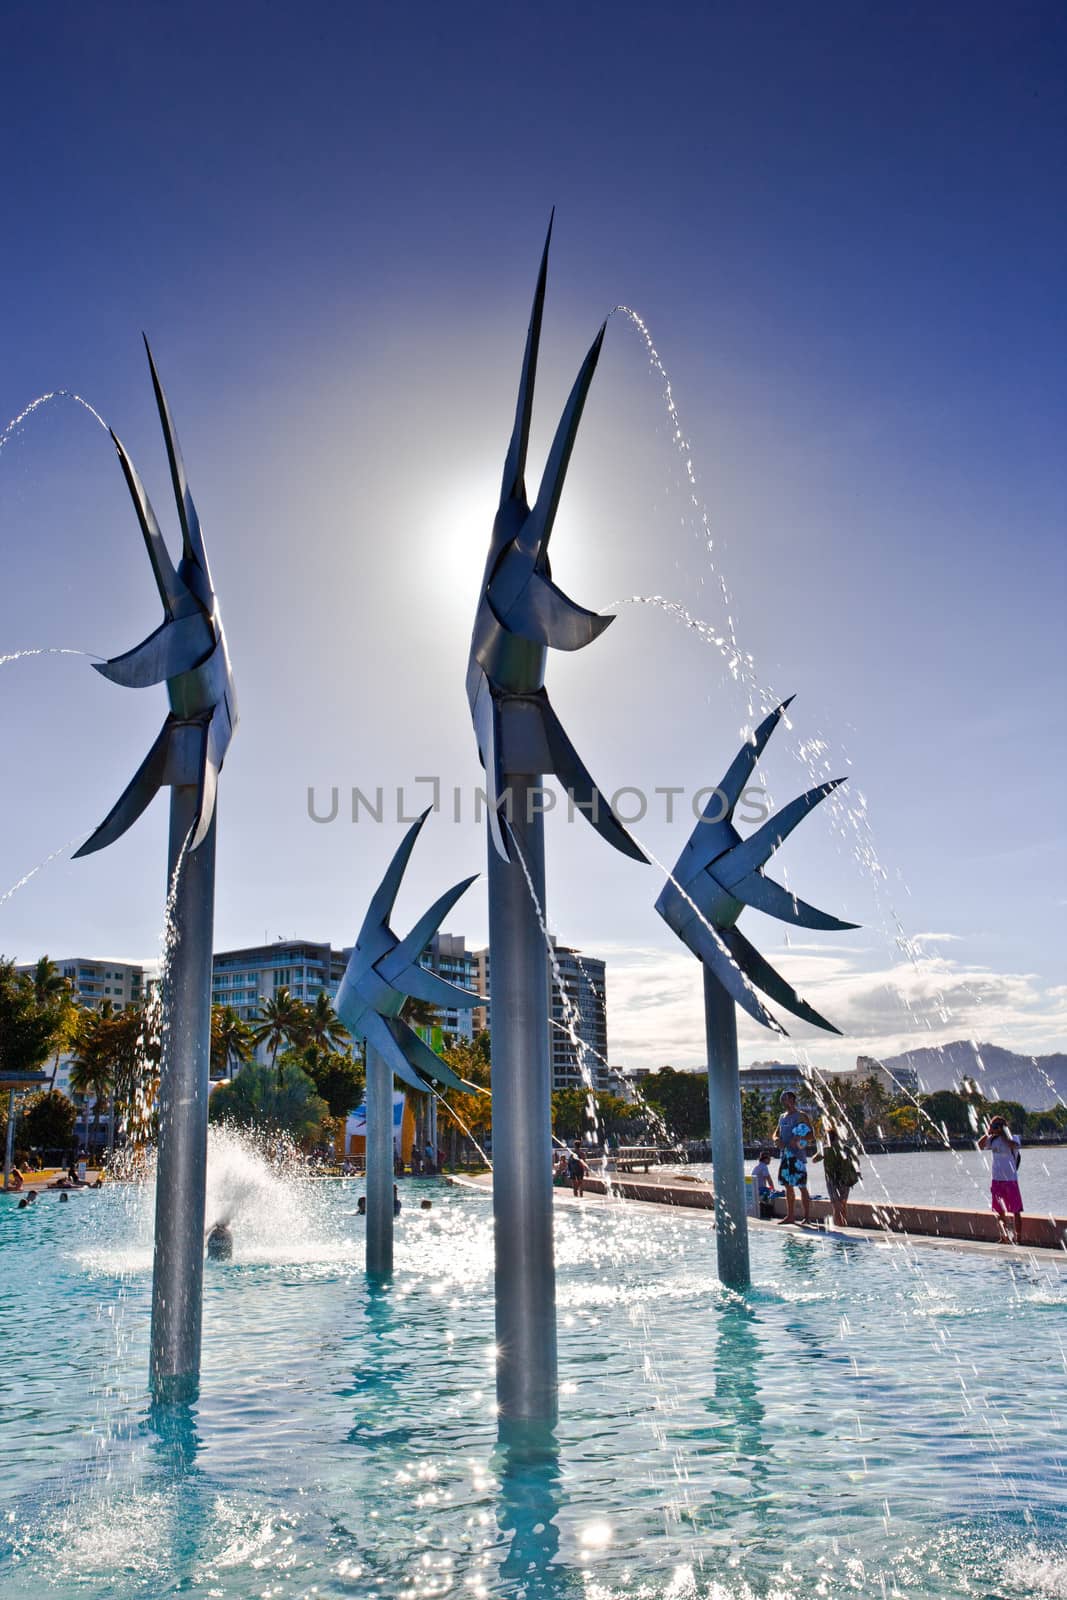 Steel fish sculpture at the Esplanade in Cairns by jrstock